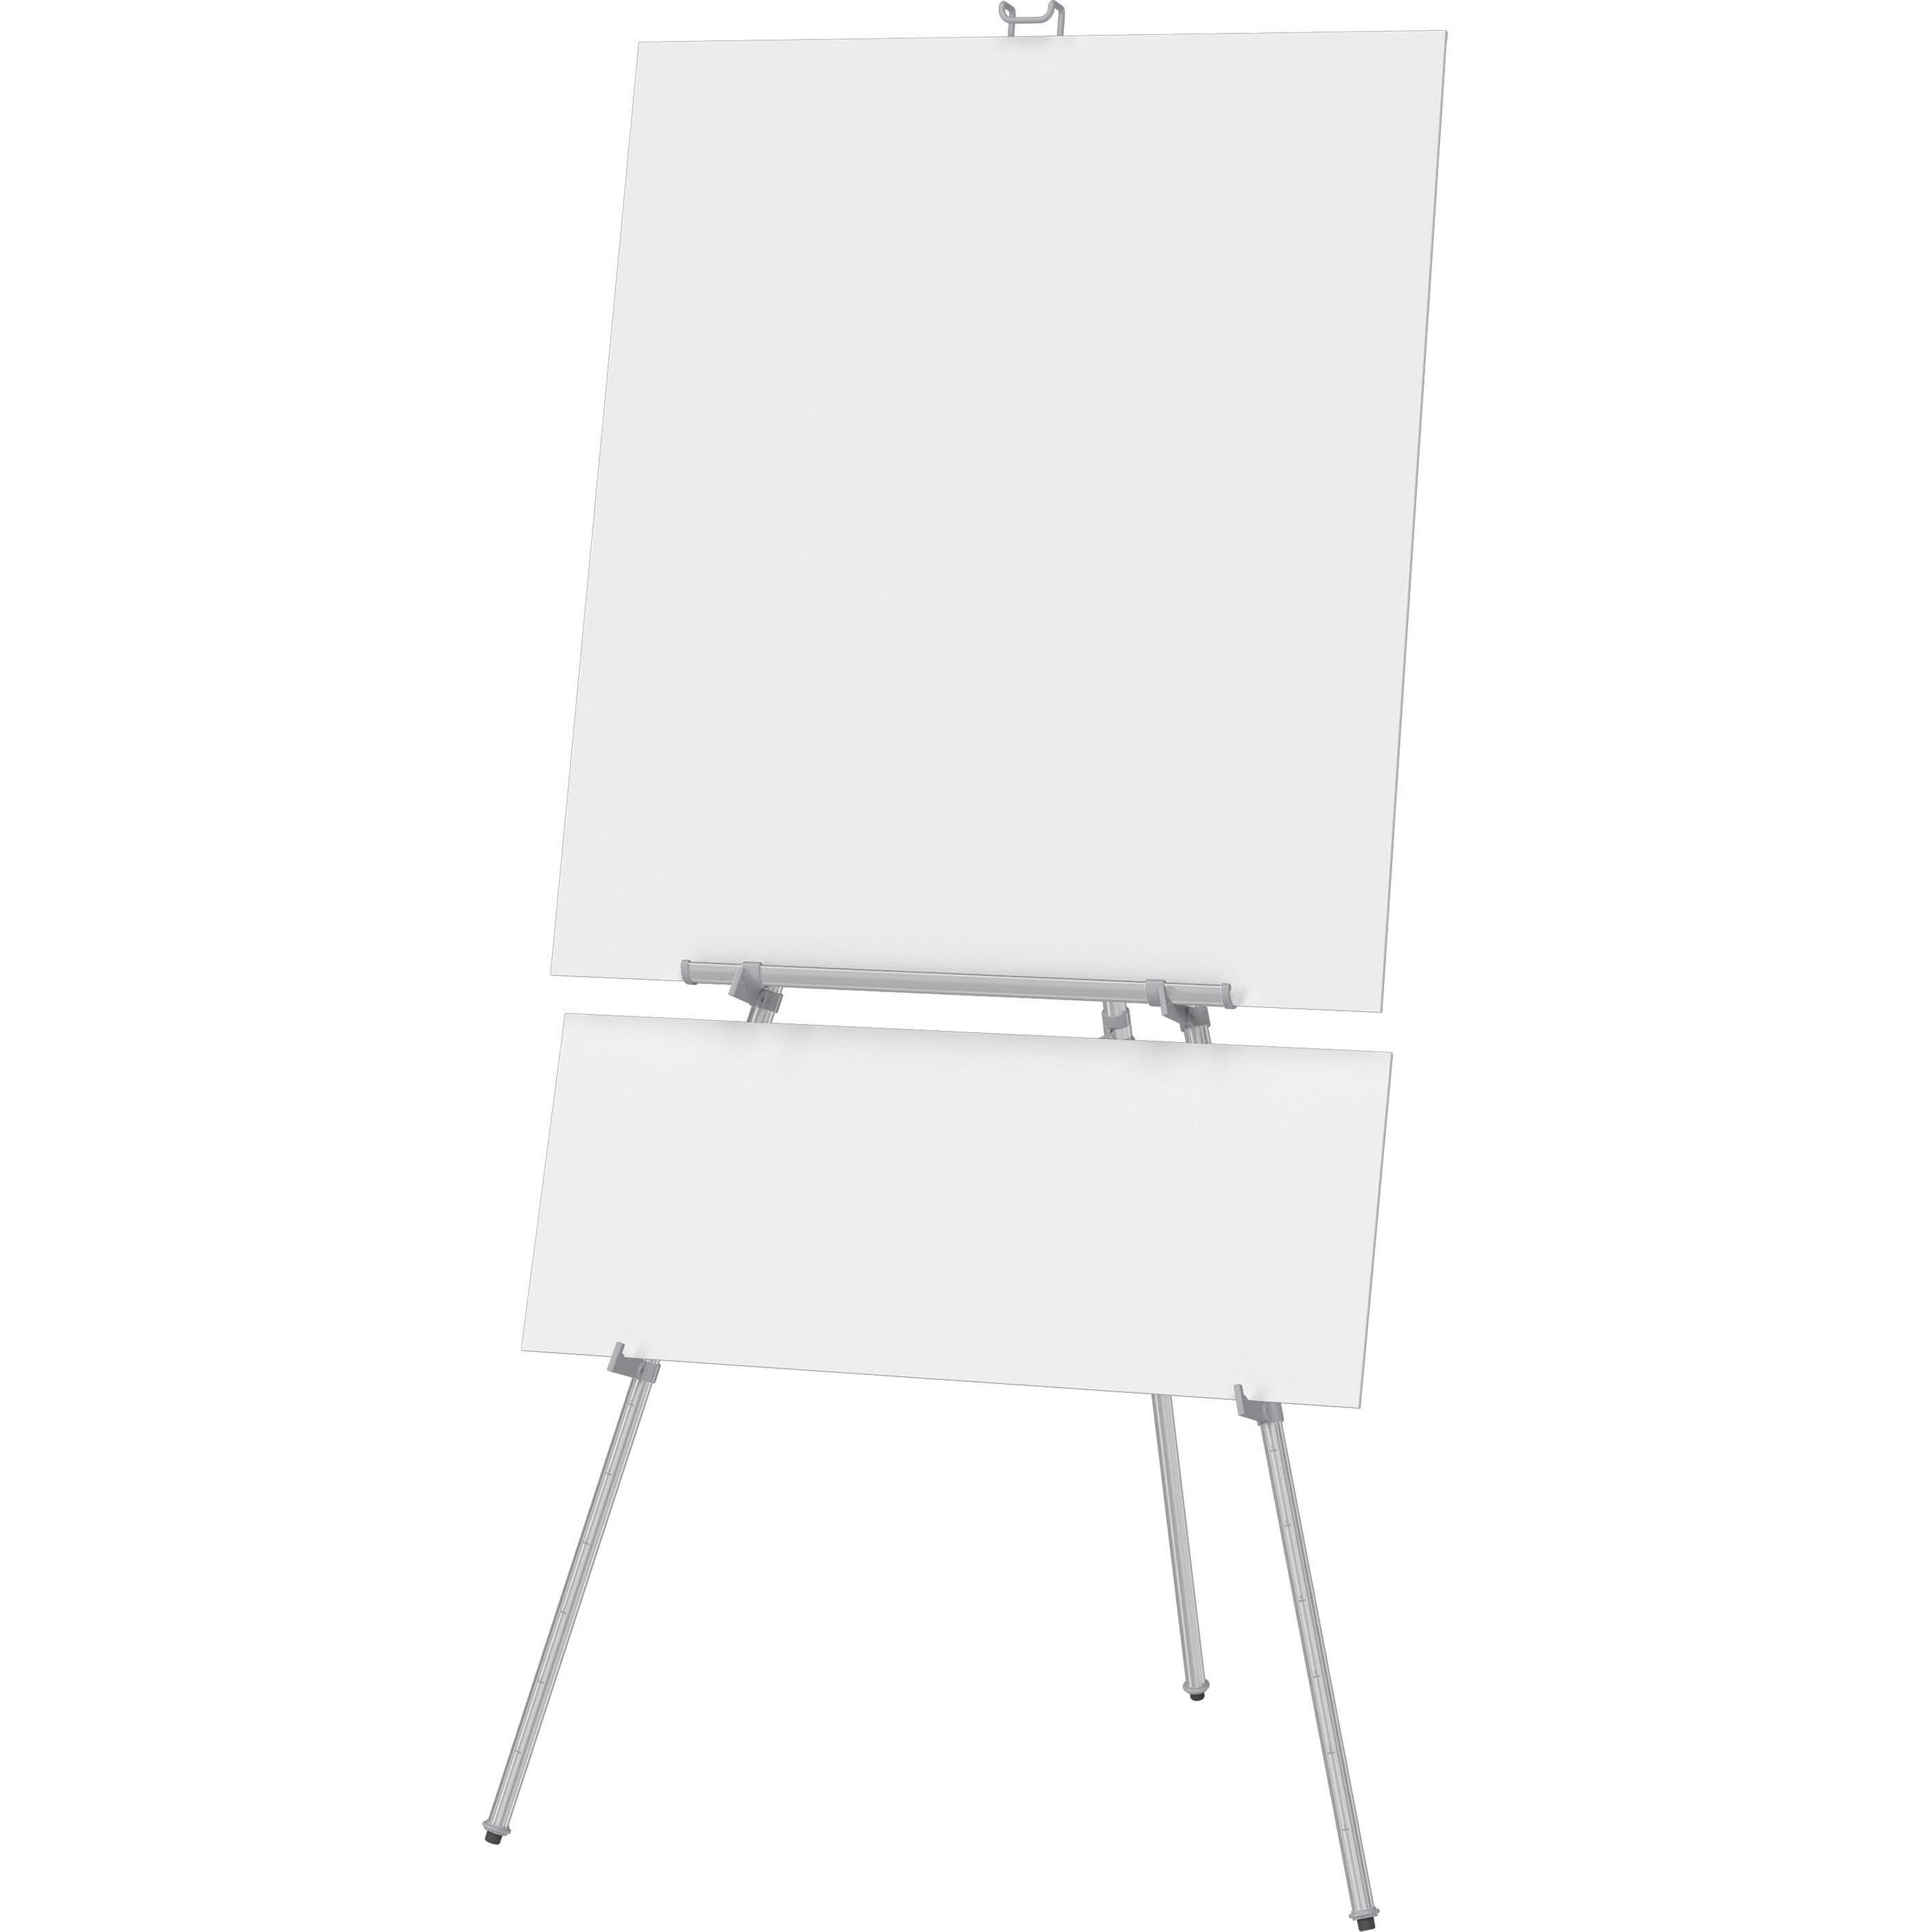 Quartet 27E Heavy-Duty Easel Black FREE 2DAY SHIPPING Holds Up To 10 lb